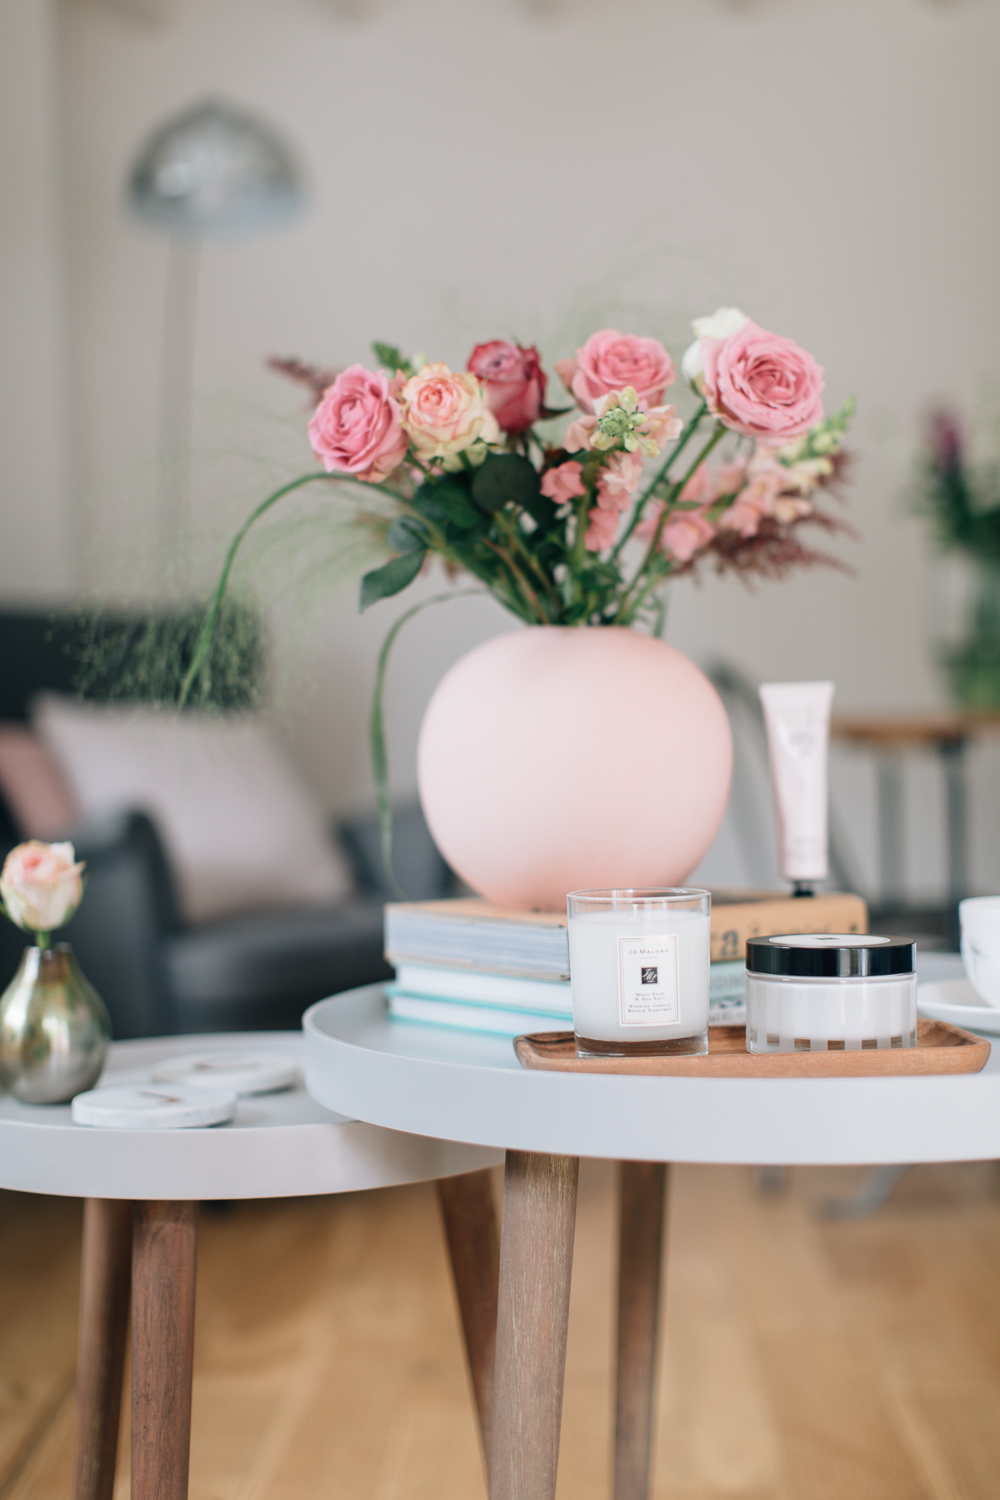 Blush accents and Jo Malone products on Cox & Cox side tables